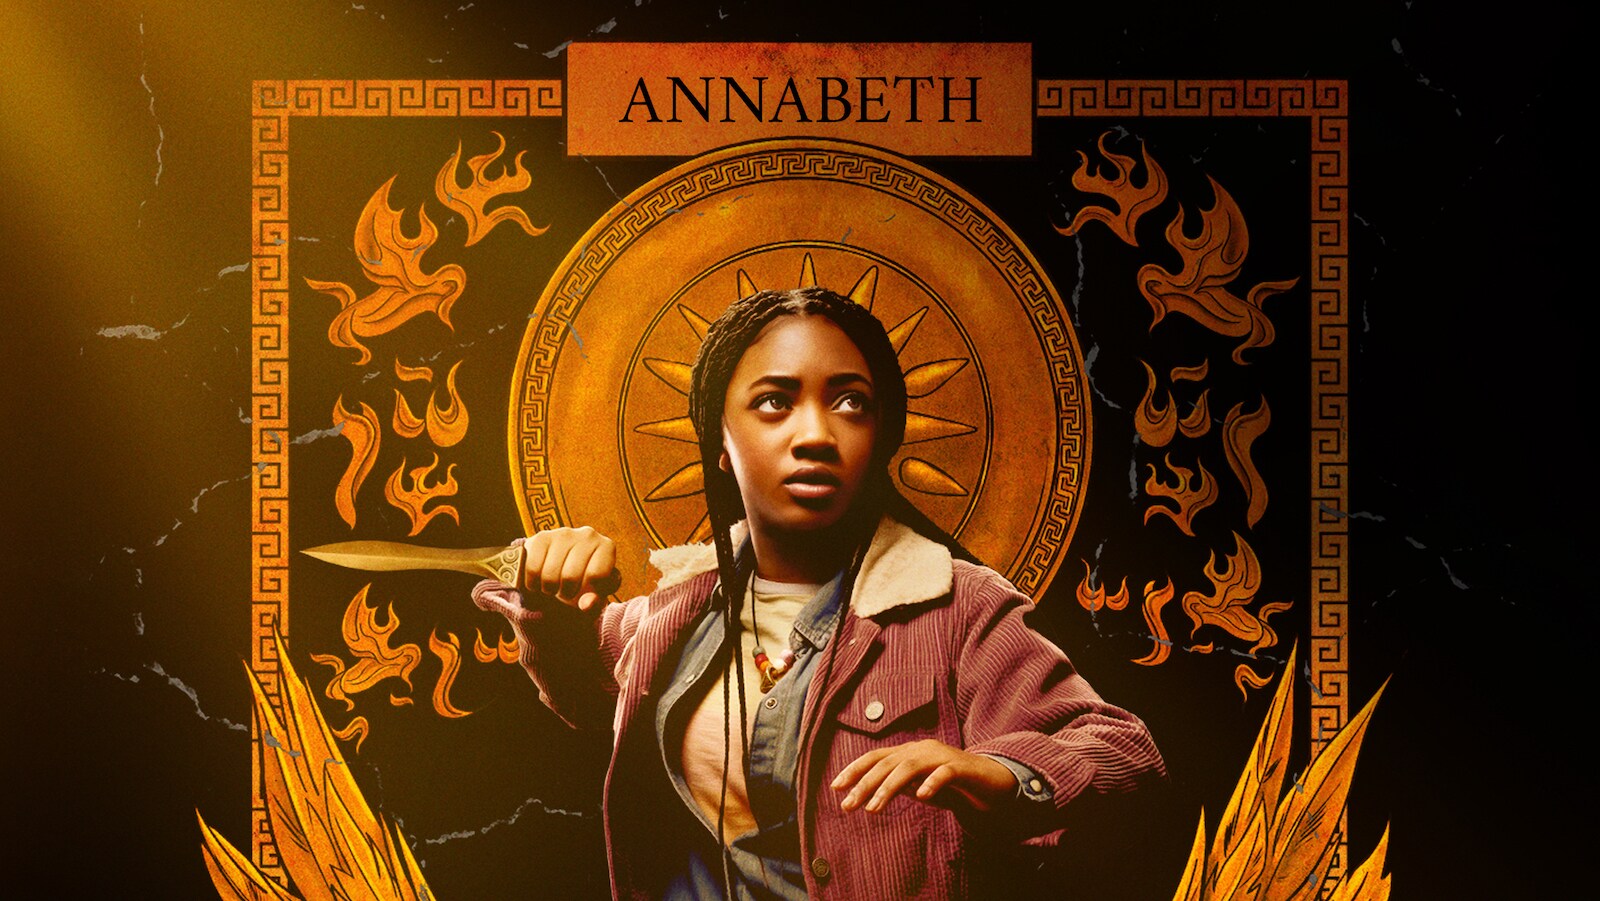 Percy Jackson and the Olympians Character Art - Annabeth Chase